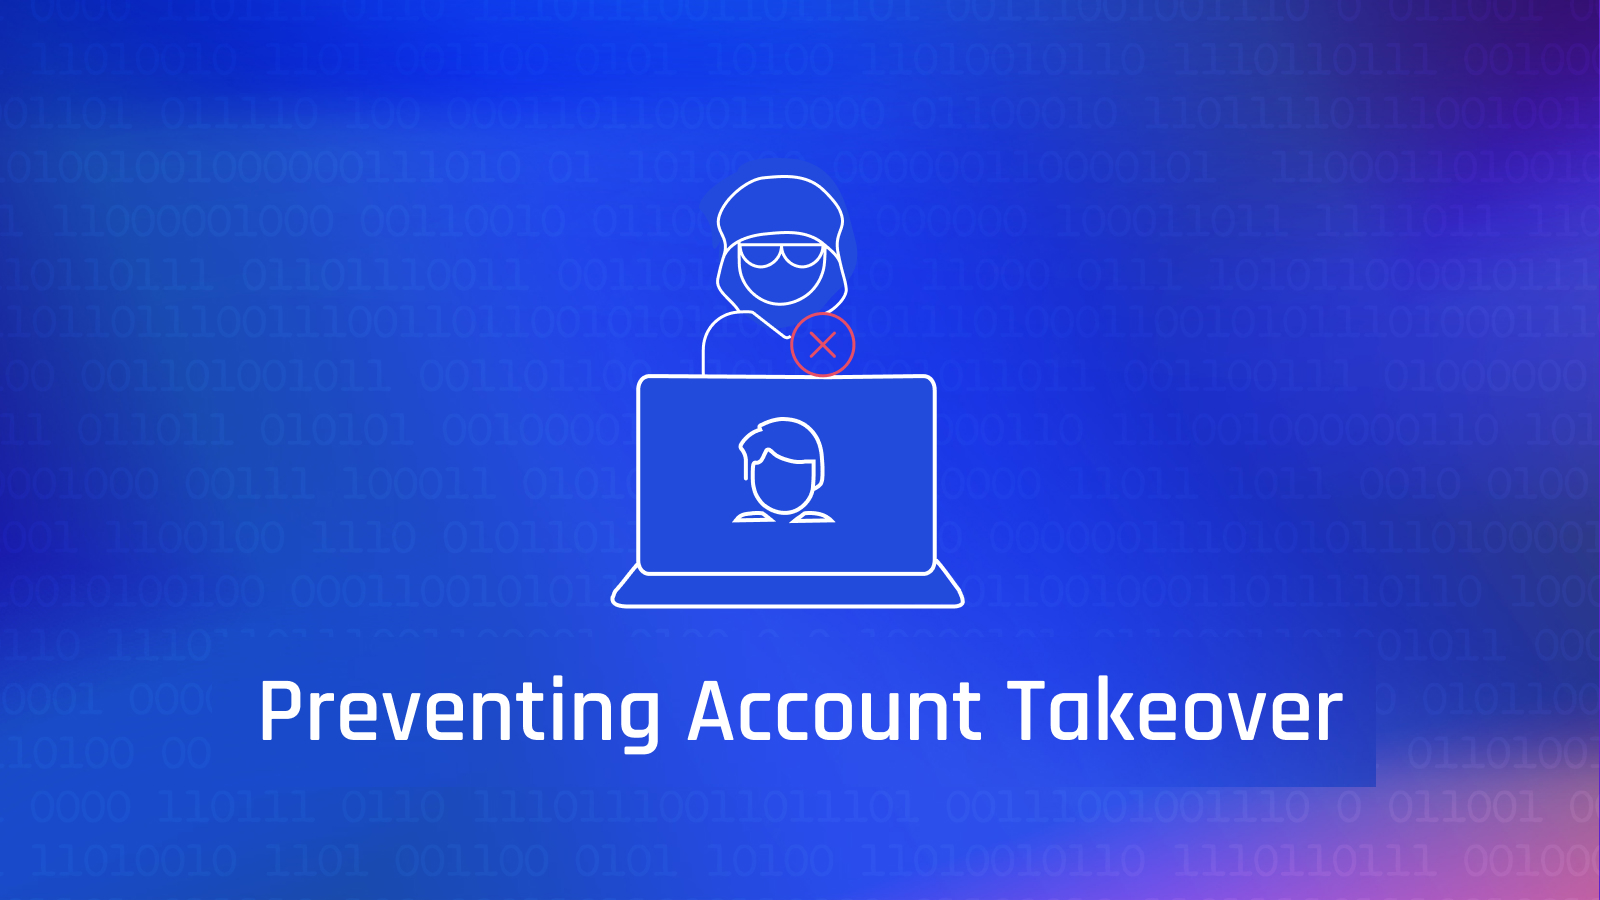 How to Prevent Account Takeover (ATO)